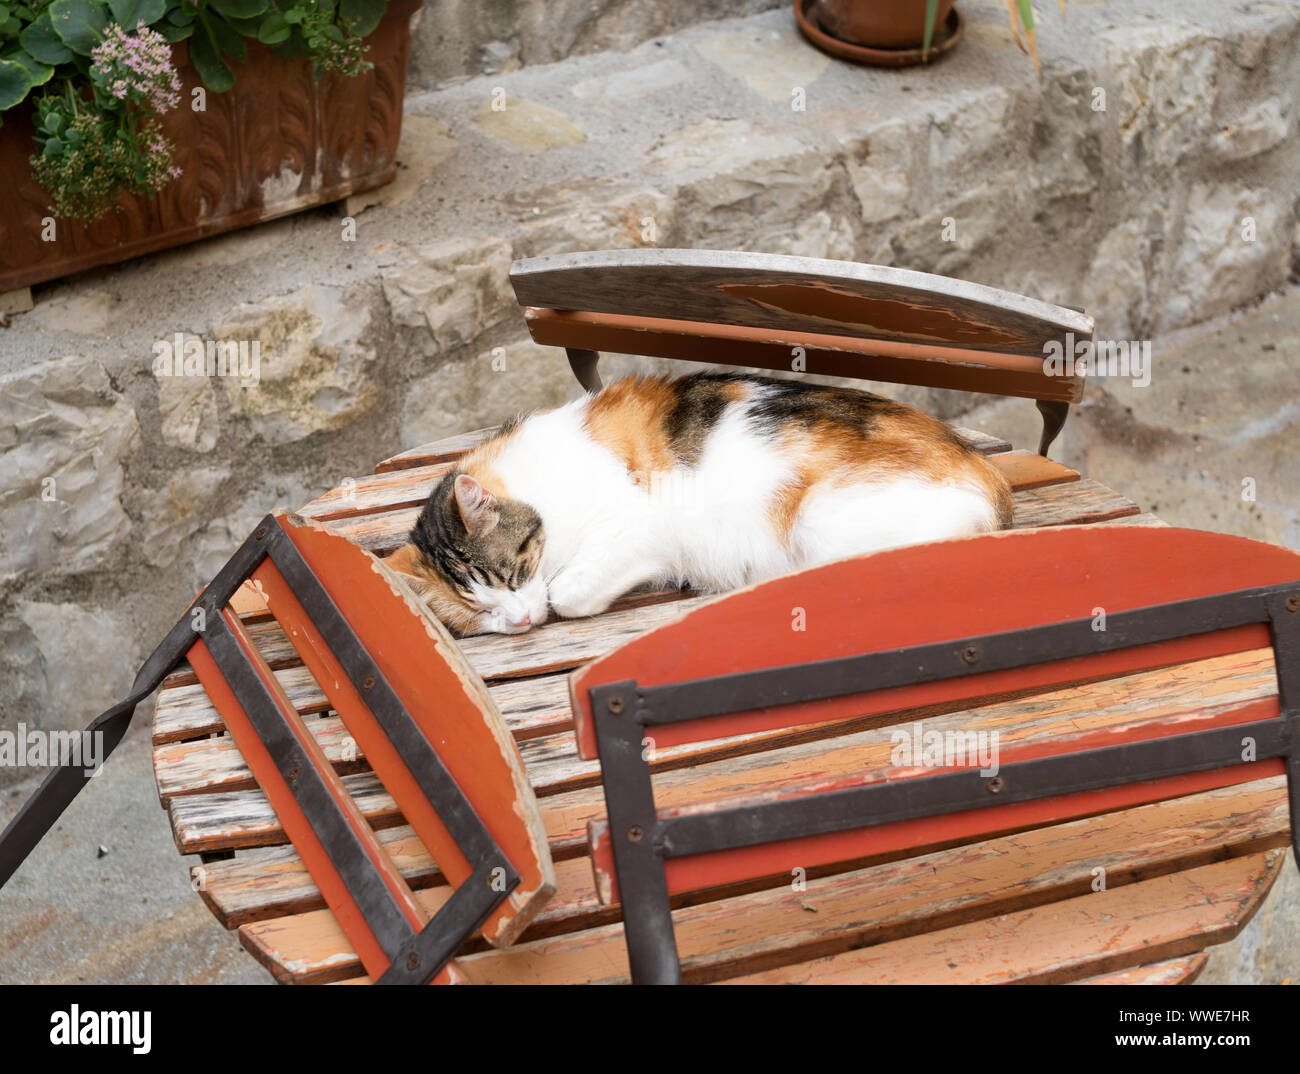 Cat asleep on table, Puget-Théniers, France, Europe Stock Photo